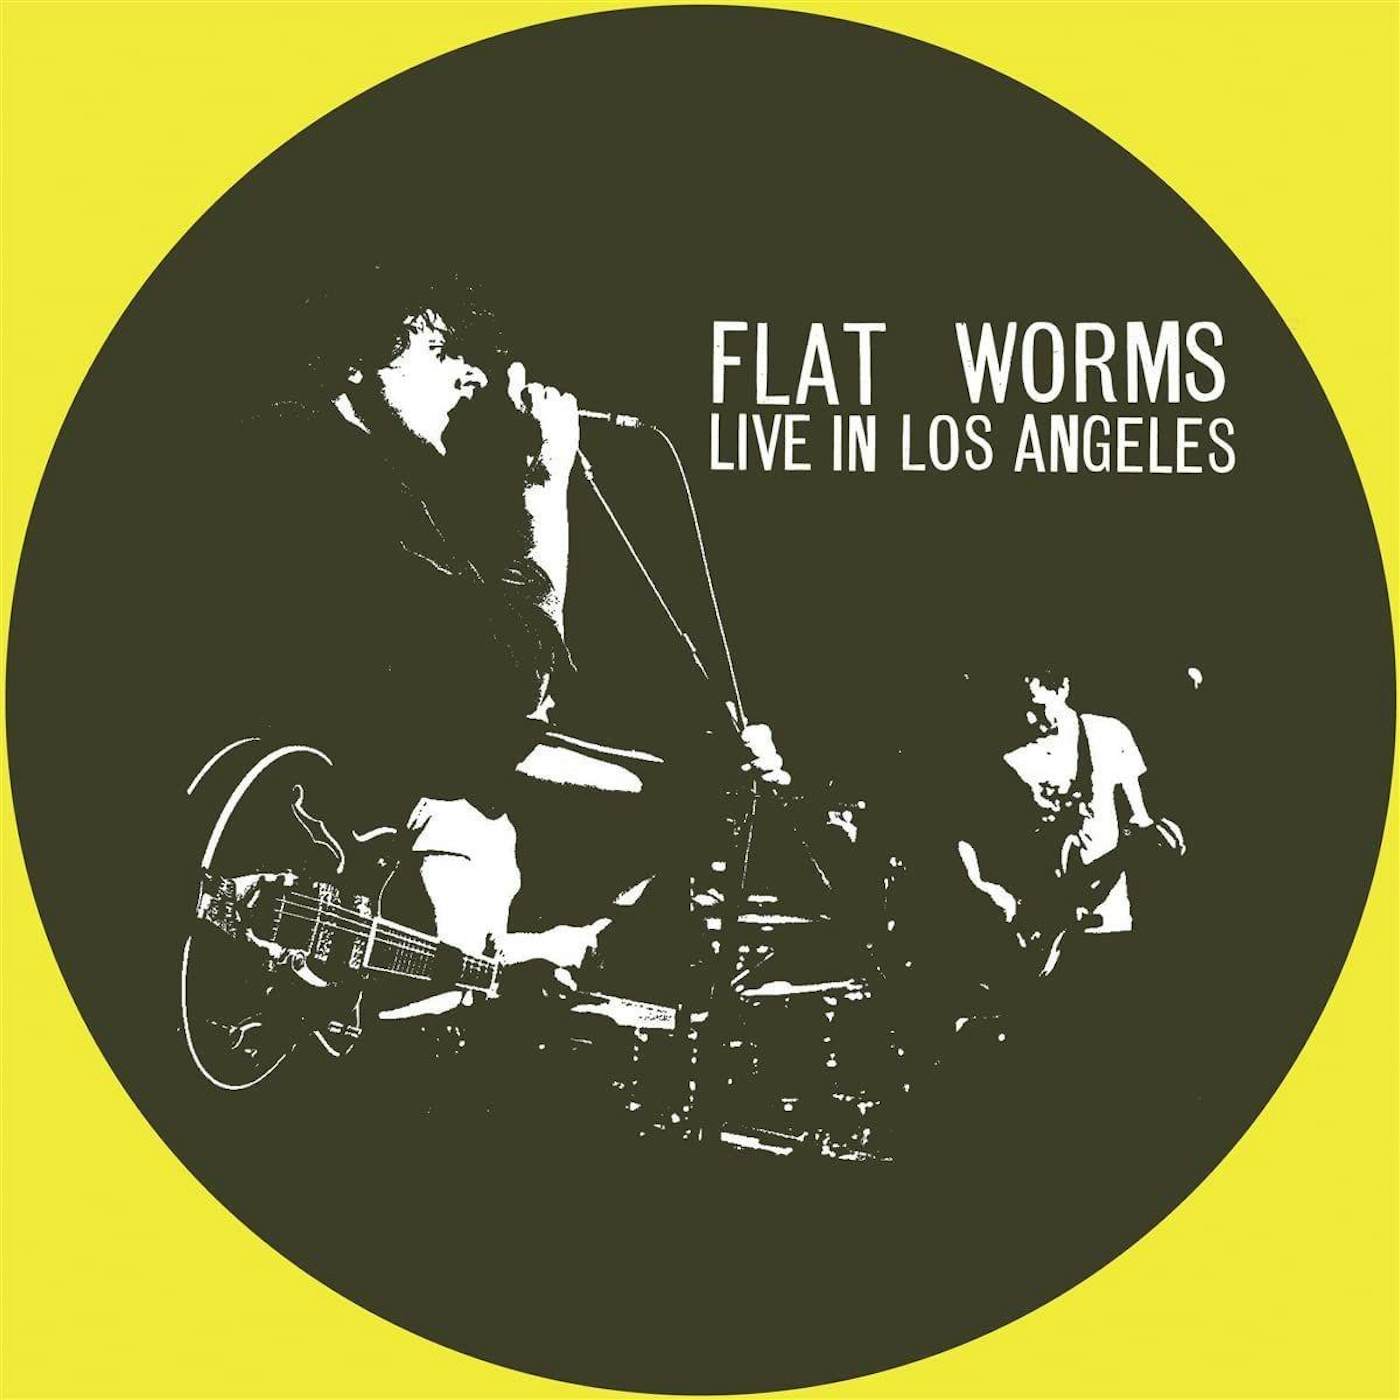 Flat Worms Live in Los Angeles Vinyl Record